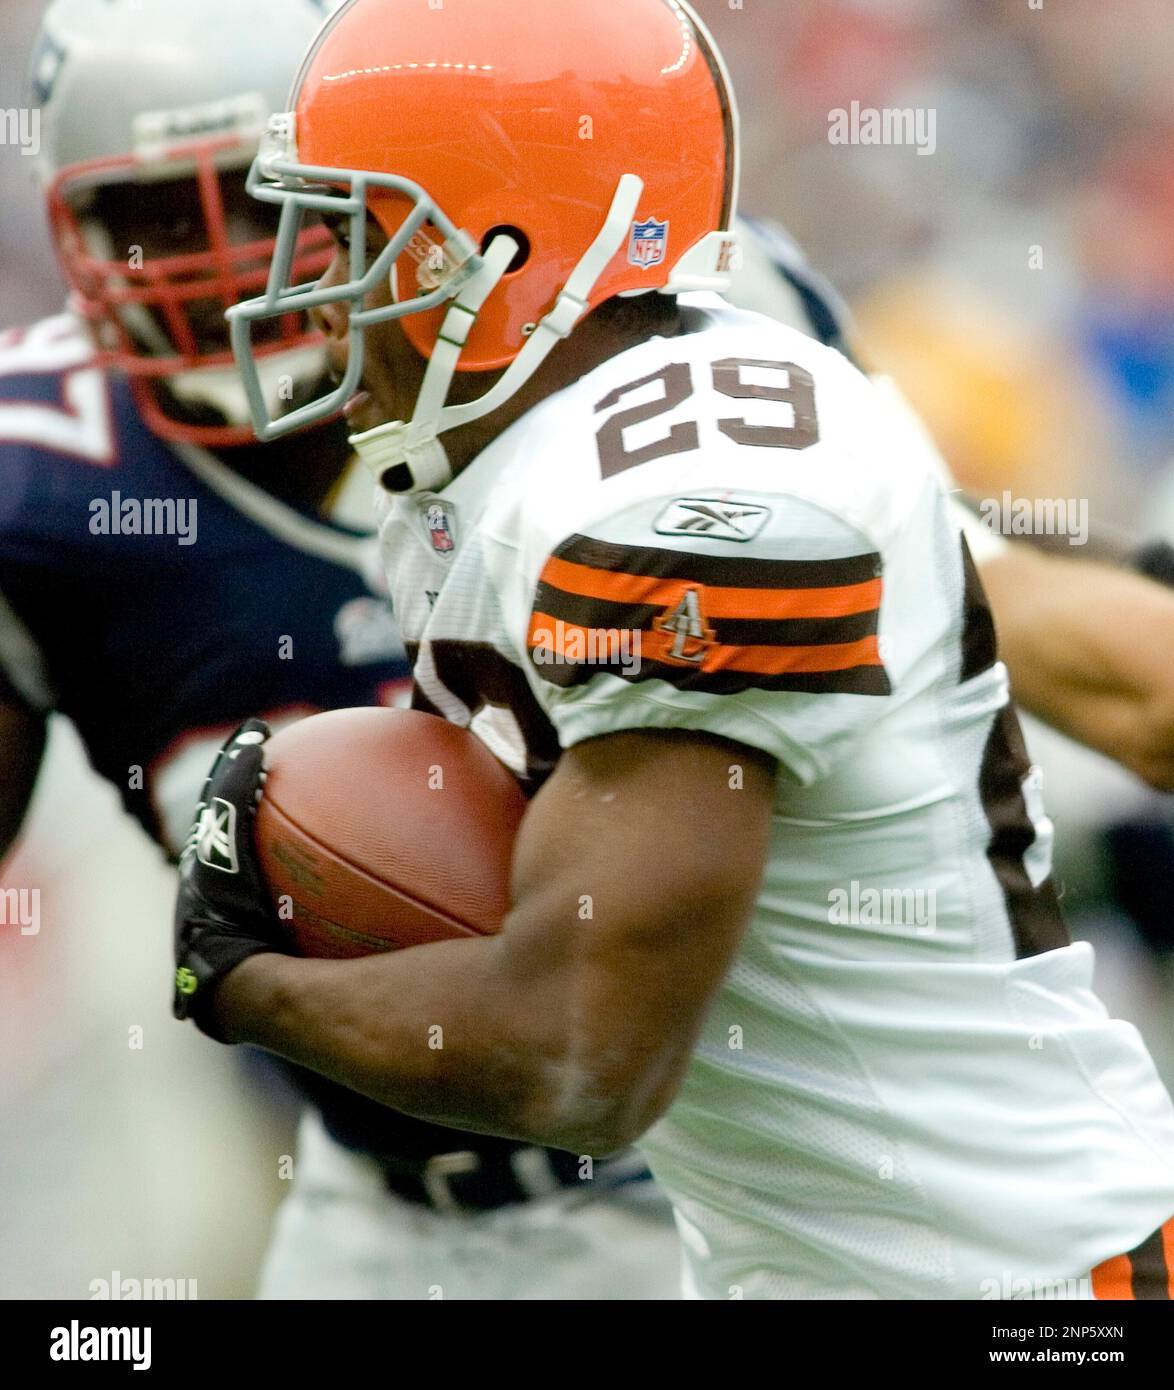 07 October 2007: Browns Running Back Jason Wright (29) on the run in the second quarter of the New England Patriots defeat of the Cleveland Browns 34 to 17 at Gillette Stadium in Foxboro, MA. (Icon Sportswire via AP Images) Stock Photo